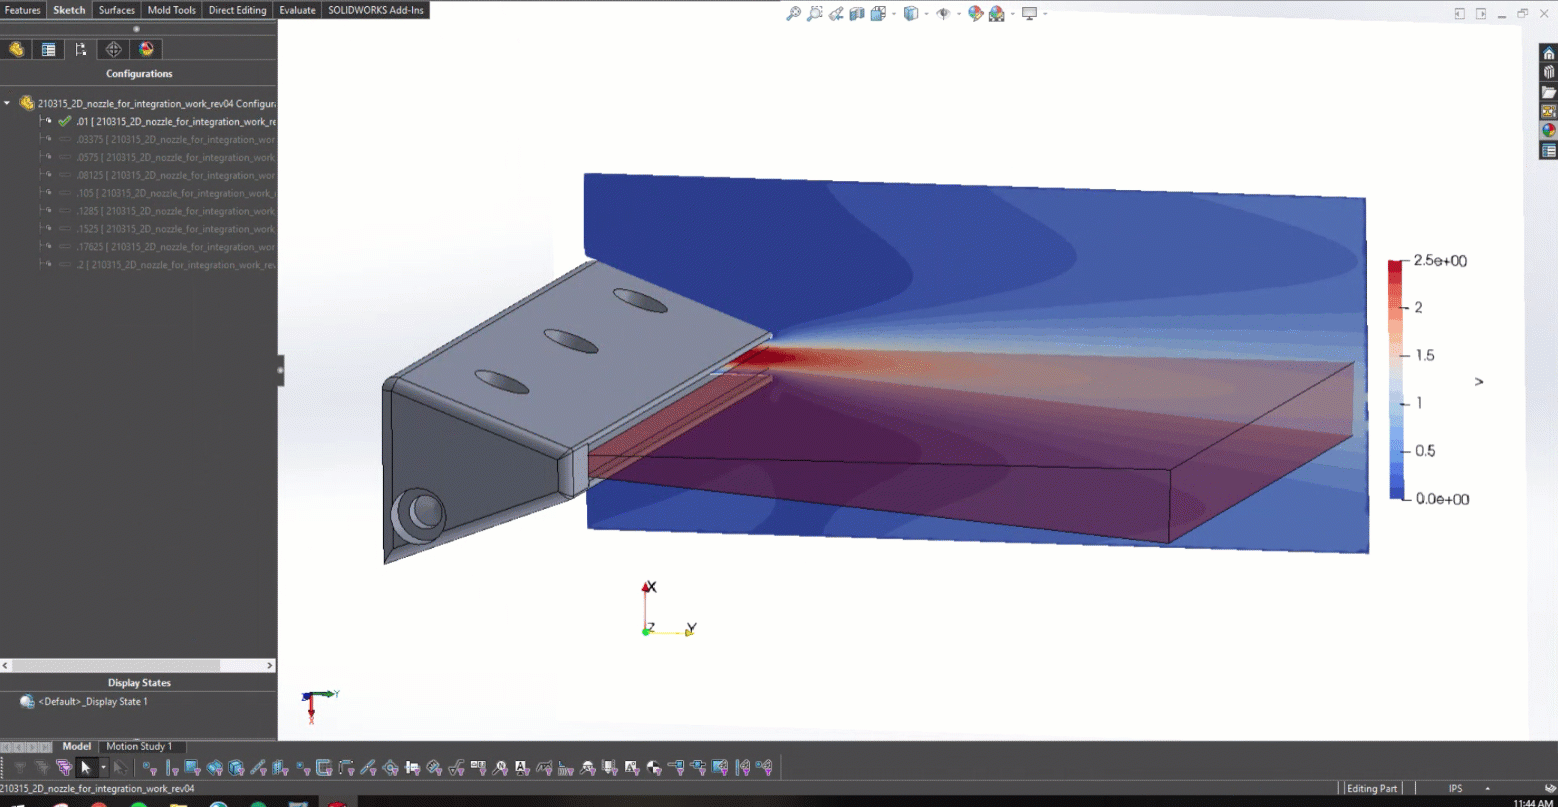 Animation of the changing lower trailing edge radius with the real-time feedback on the resulting jet angle